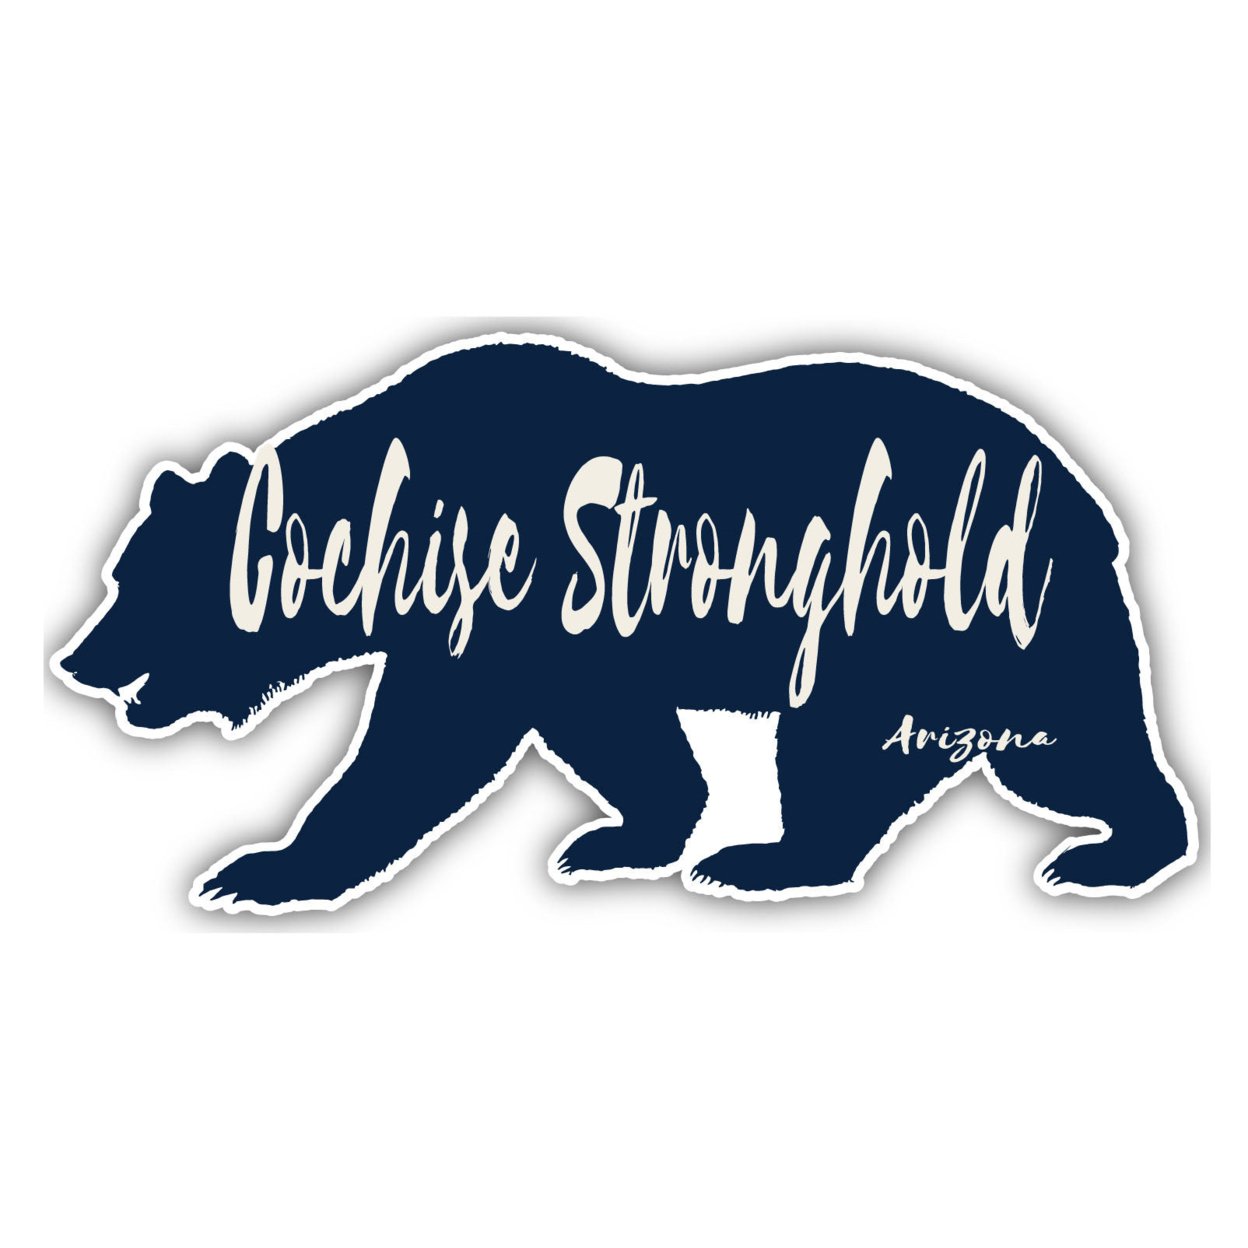 Cochise Stronghold Arizona Souvenir Decorative Stickers (Choose Theme And Size) - 4-Pack, 2-Inch, Bear